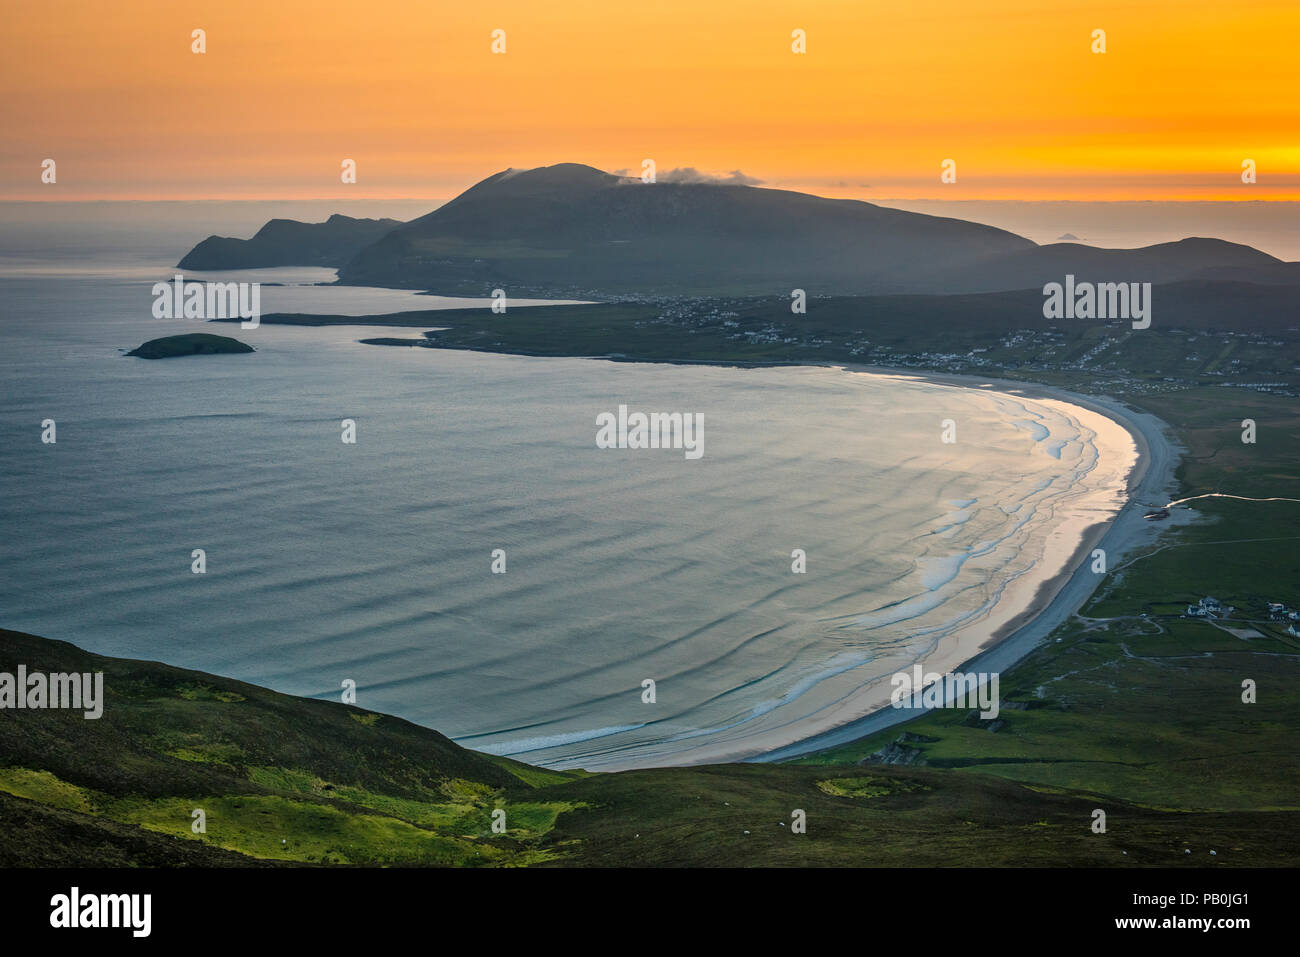 View of the Bay of Keel at sunset, Achill Island, County Mayo, Republic of Ireland Stock Photo